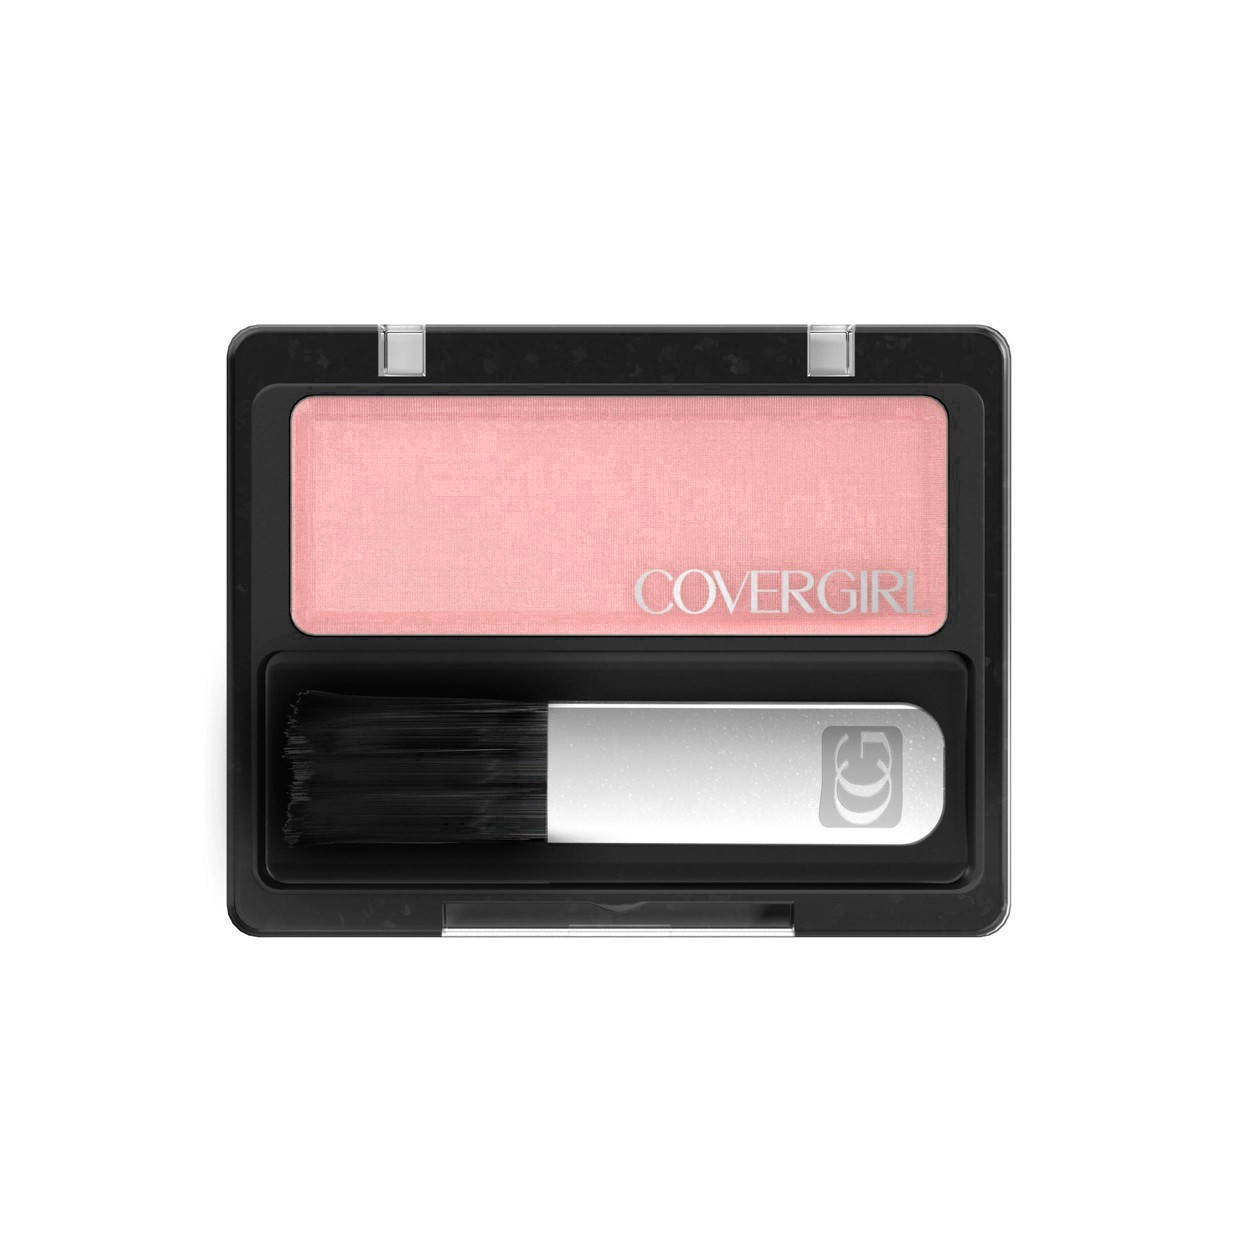 slide 20 of 42, Covergirl COVERGIRL Classic Color Blush Rose Silk, 1 ct